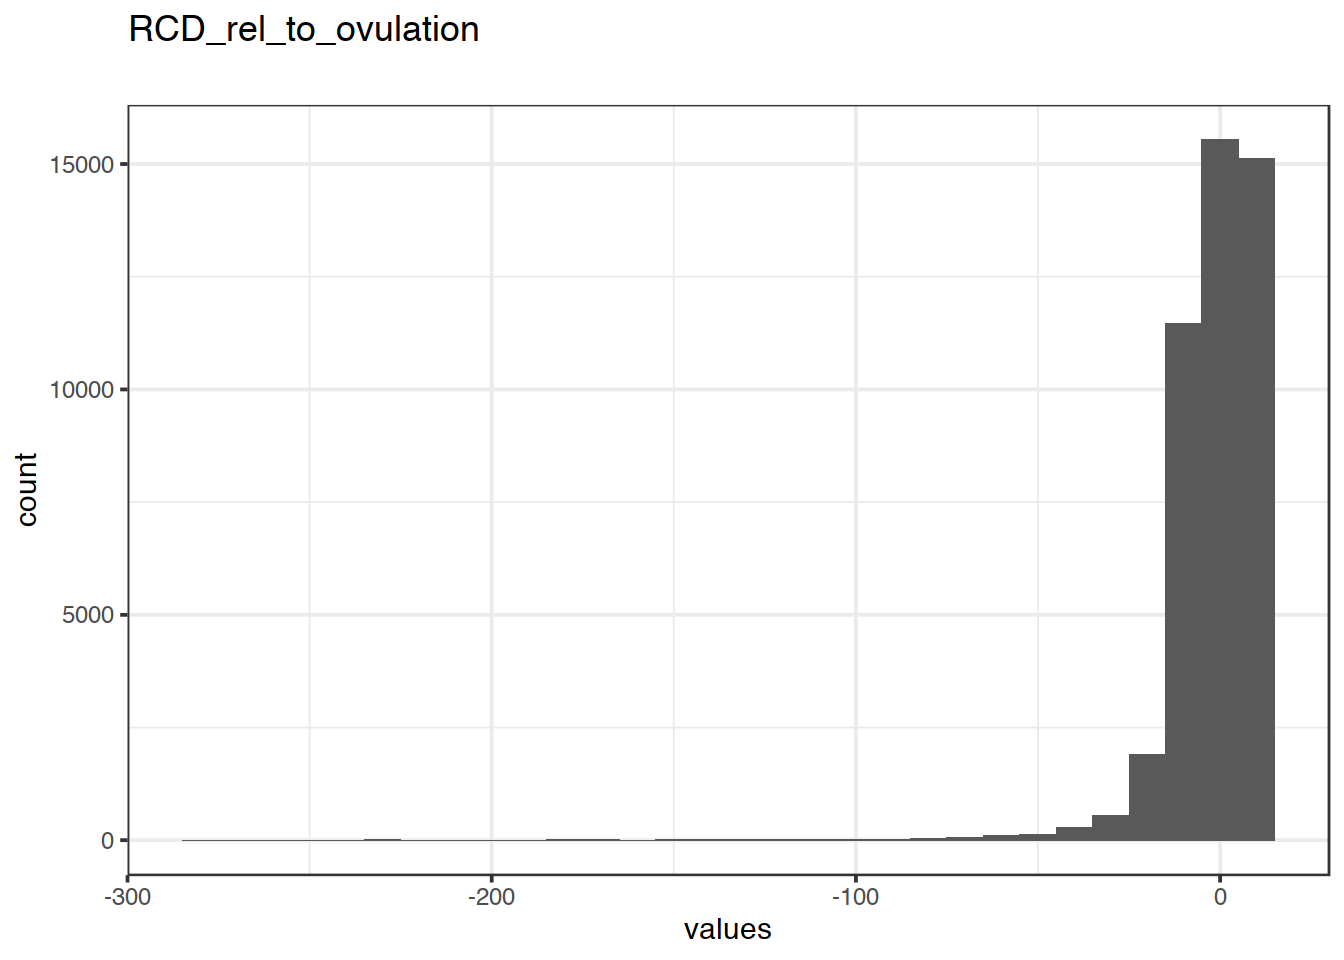 Distribution of values for RCD_rel_to_ovulation